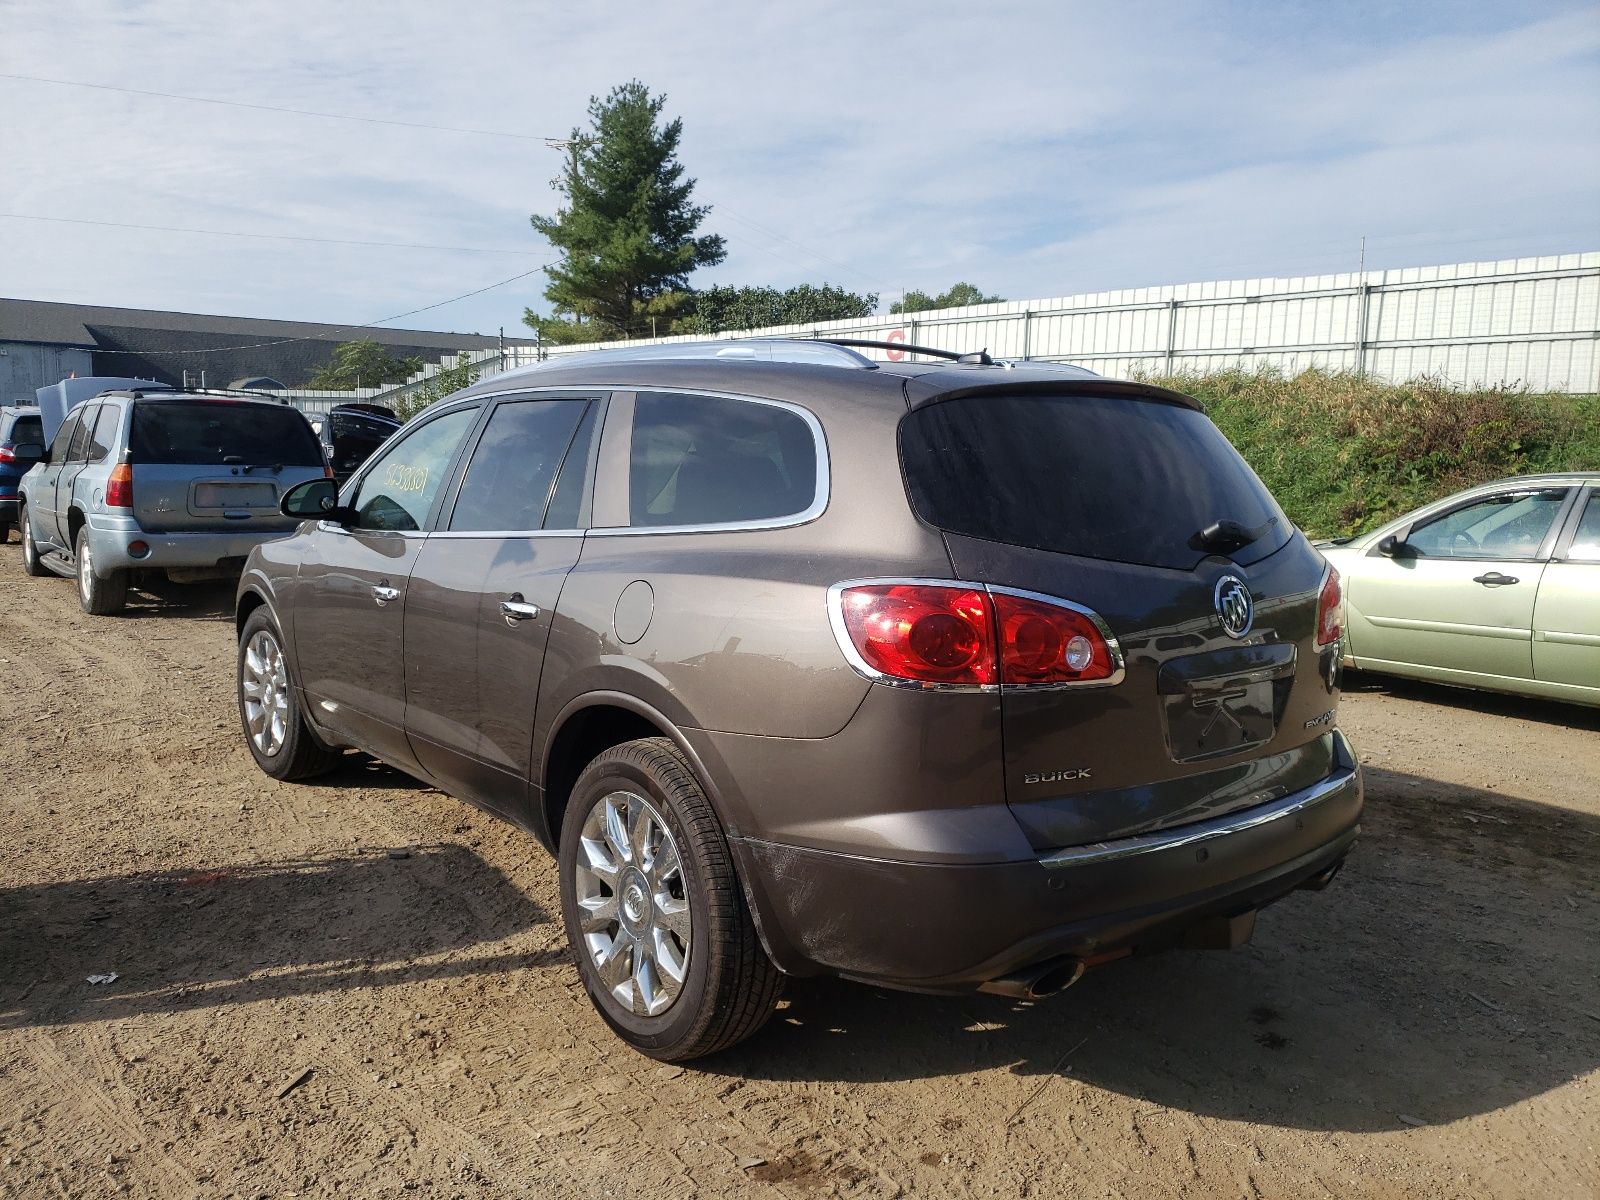 5GAKVDED8CJ137961 Buick Enclave 2012